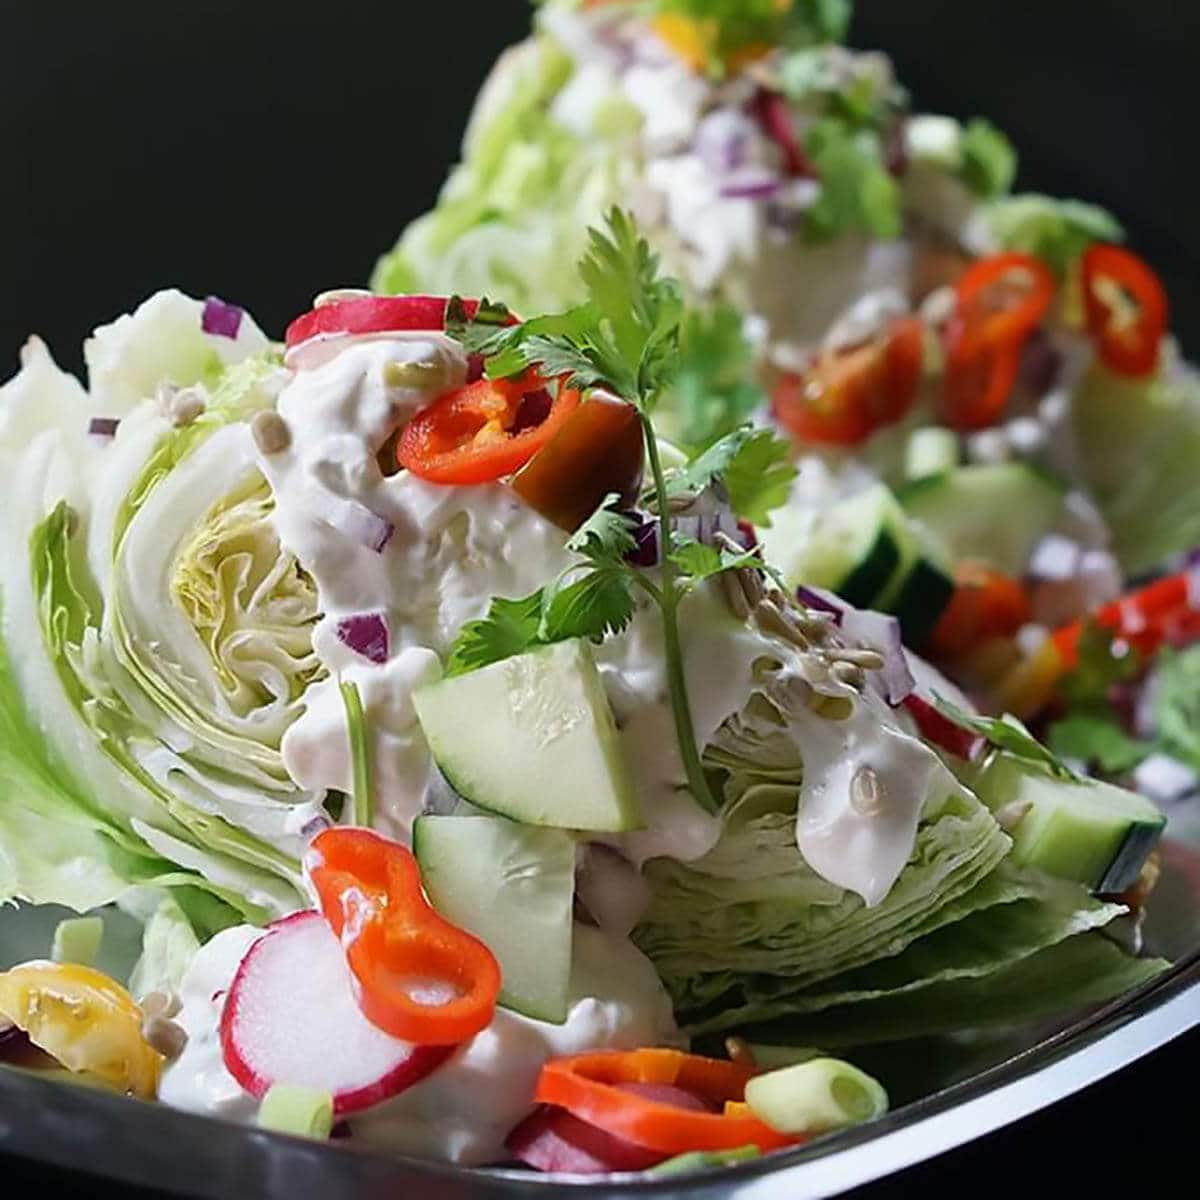 Outback wedge salad on large plate topped with blue cheese salad dressing.